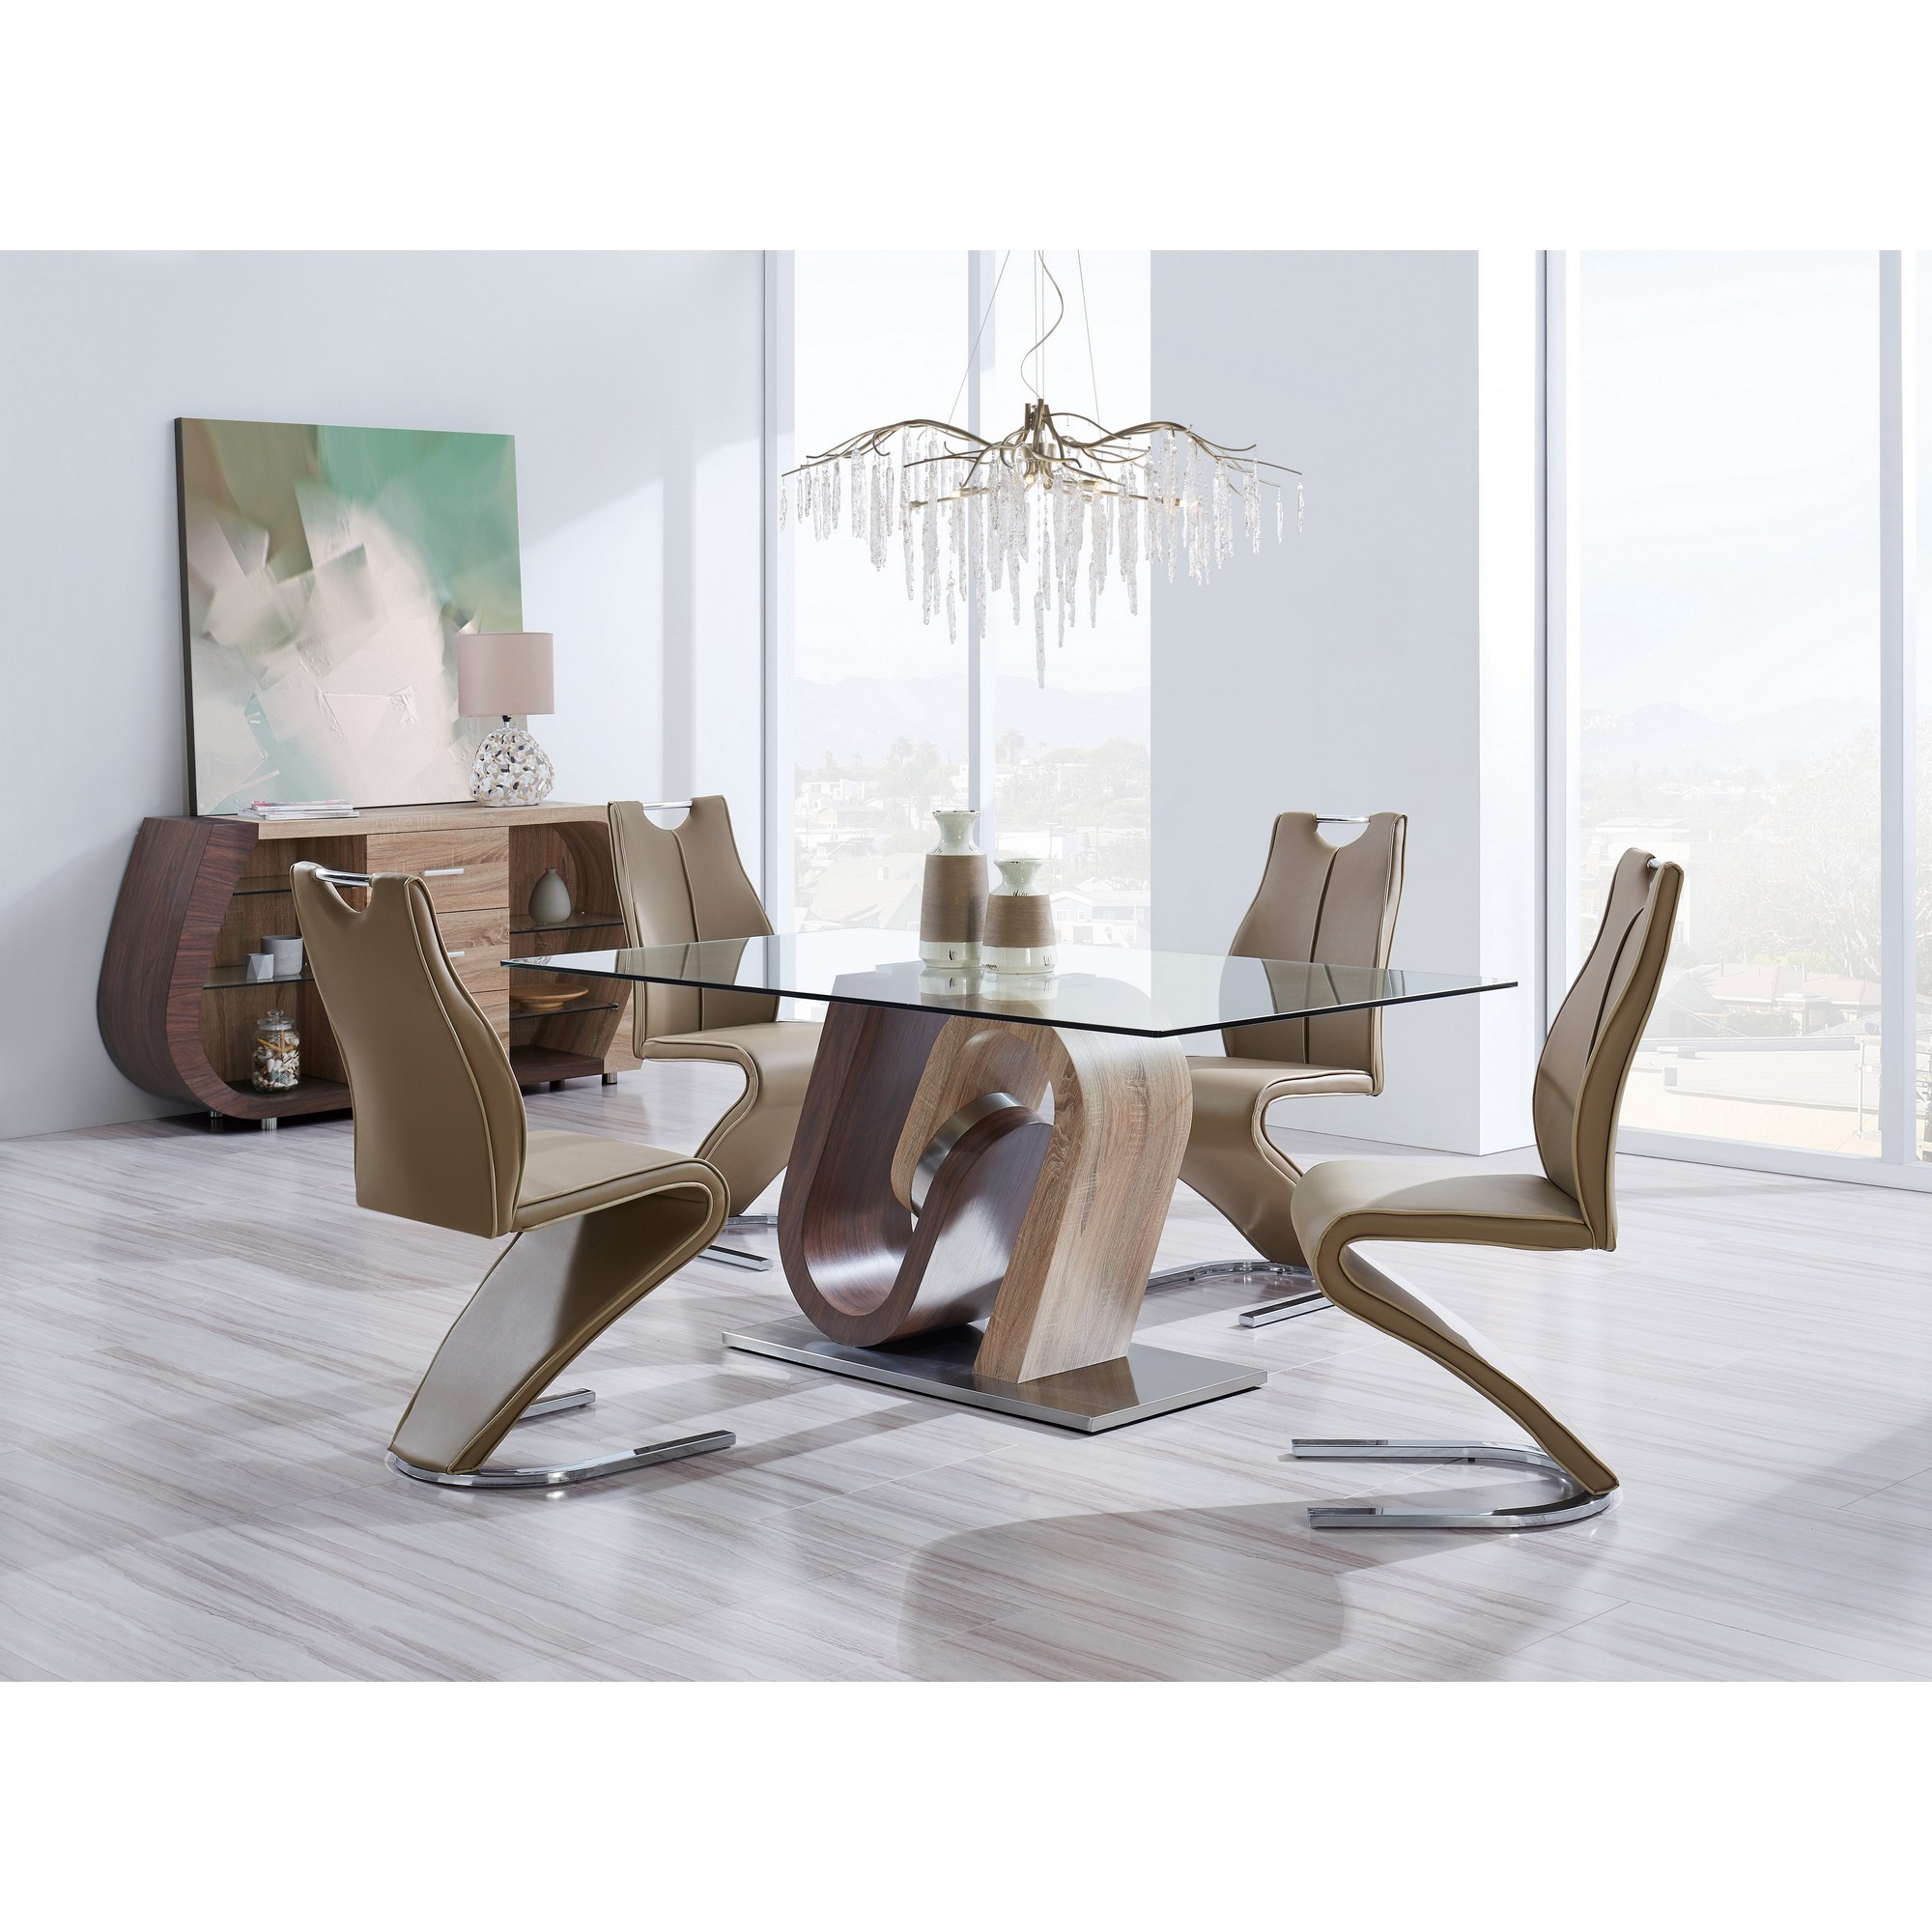 Set of 2 Cappucino and Light Cappucino Z style design Dining Chairs with Metalic Base and Seat Back Handle